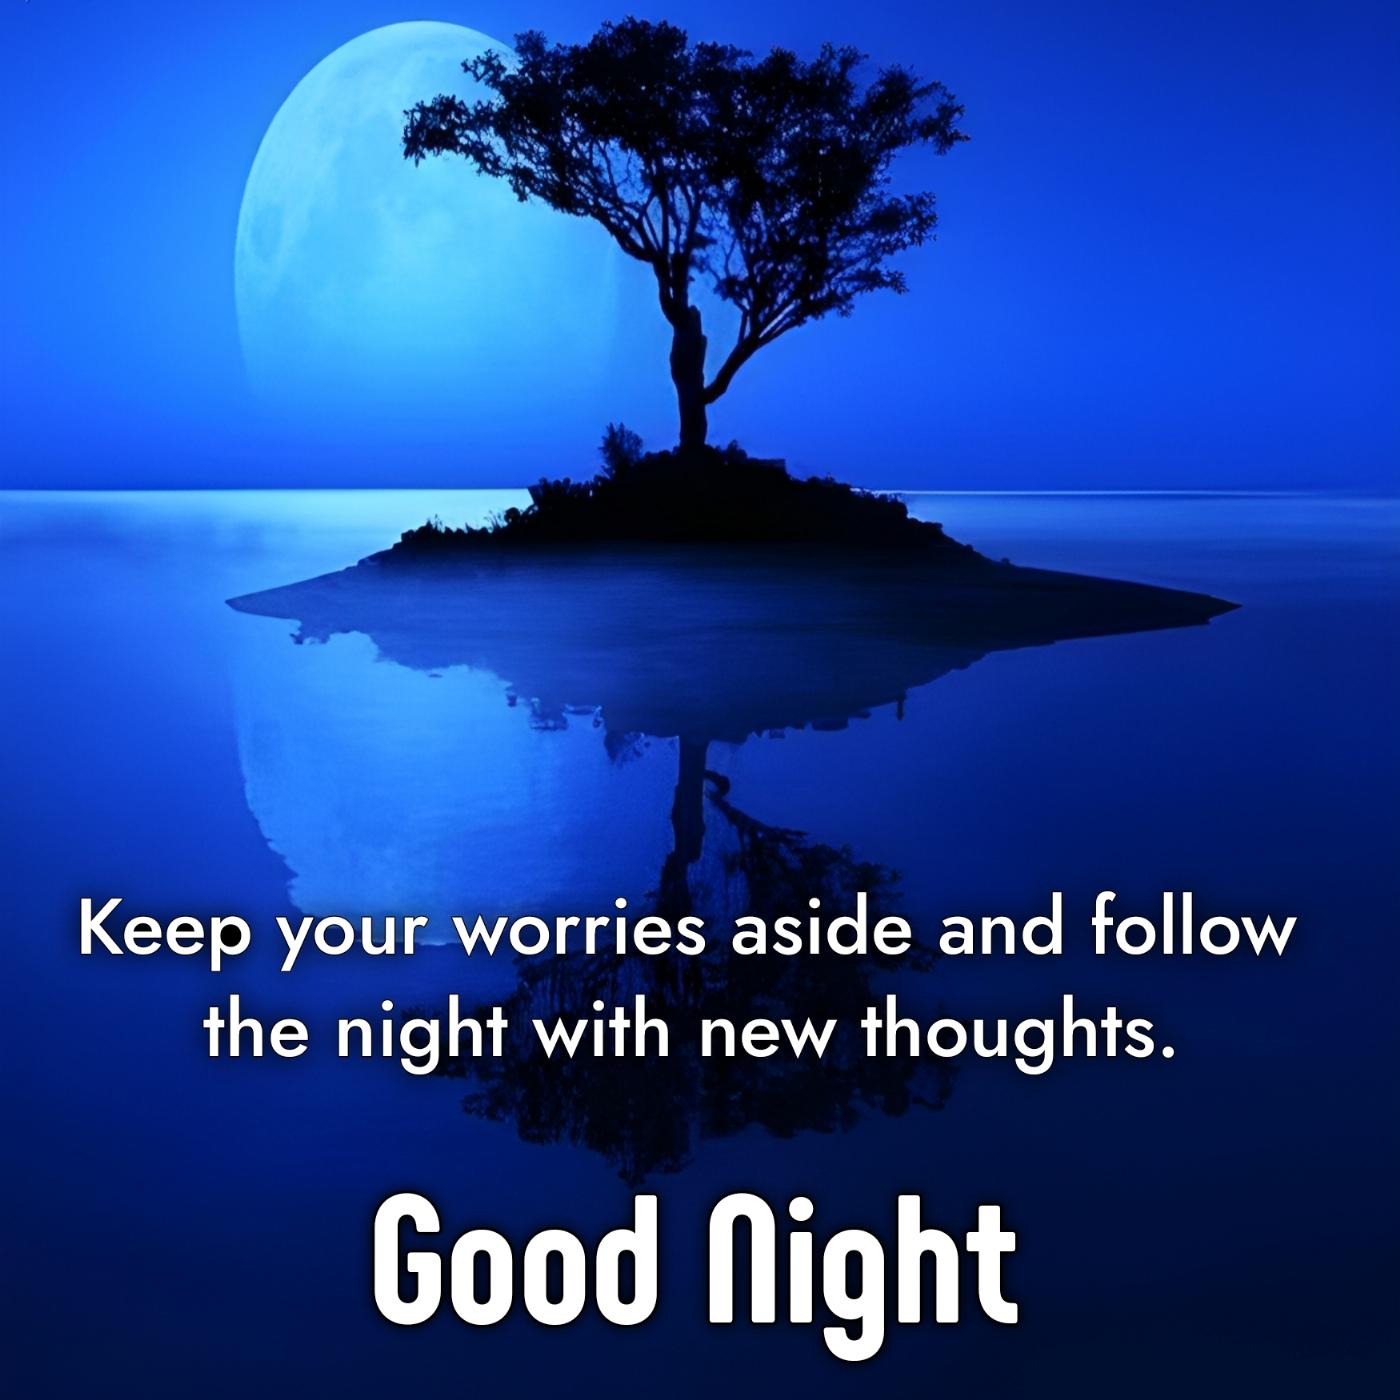 Keep your worries aside and follow the night